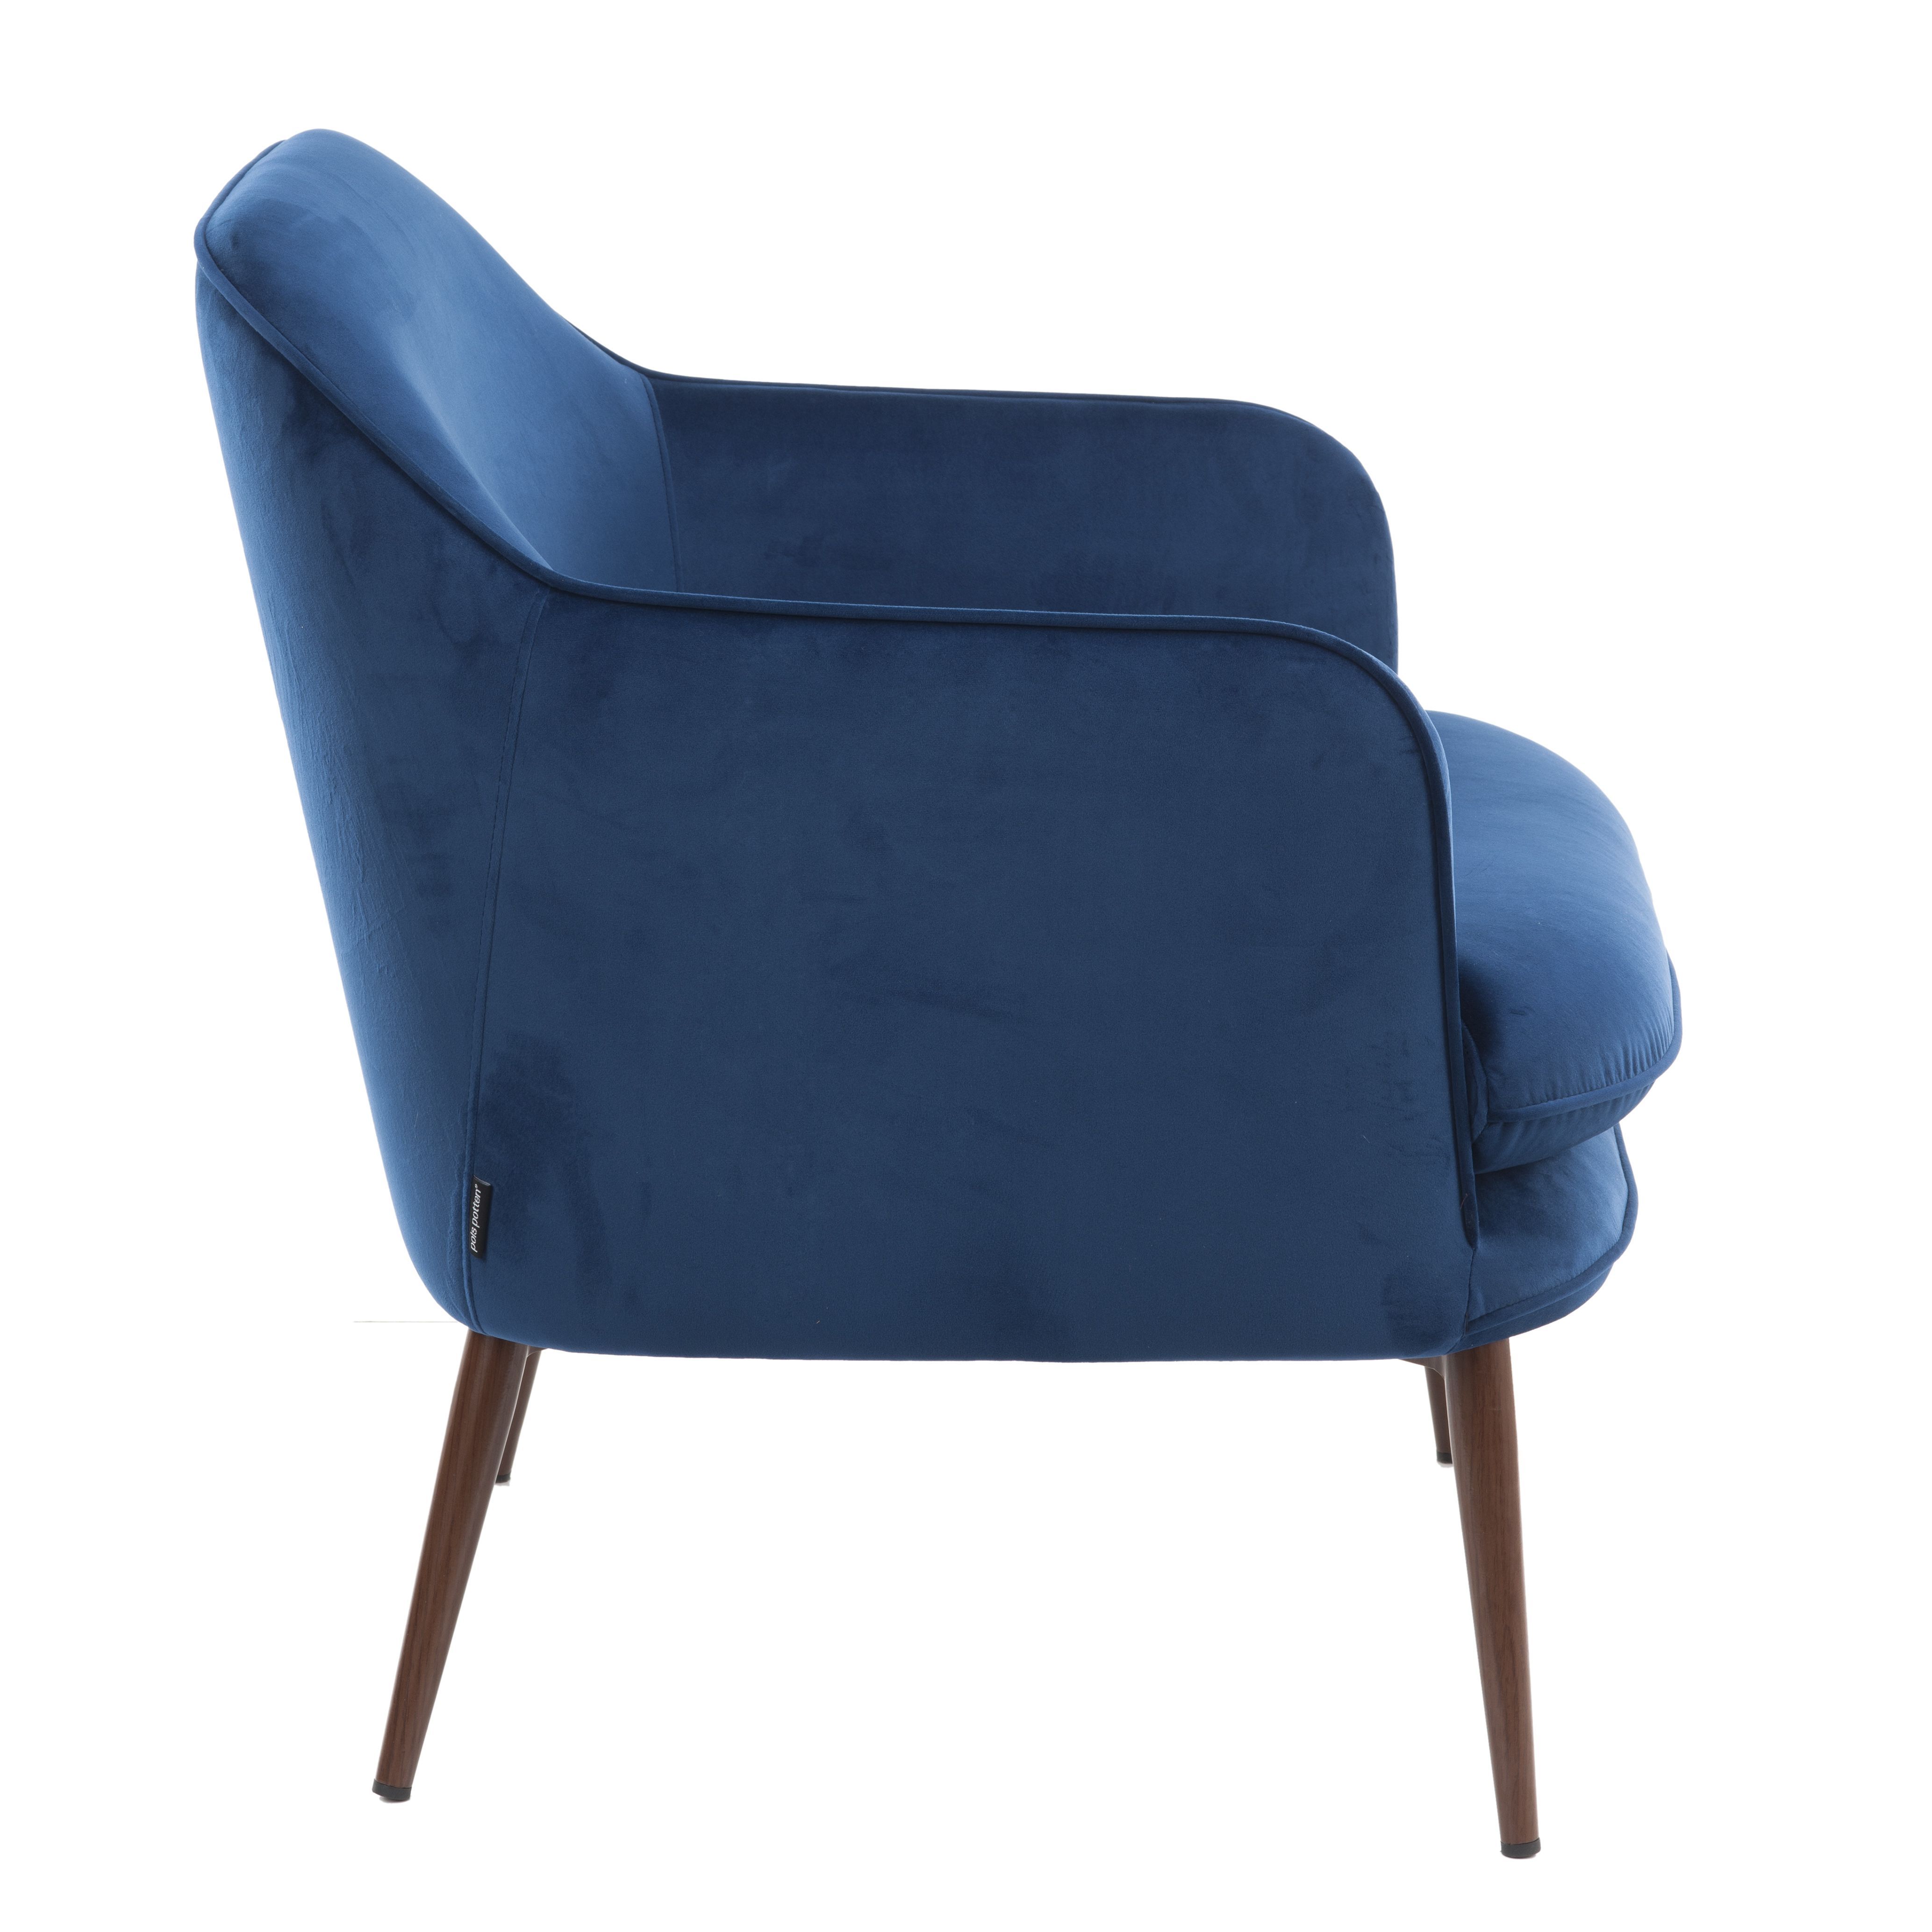 The Charmy by Pols Potten chair